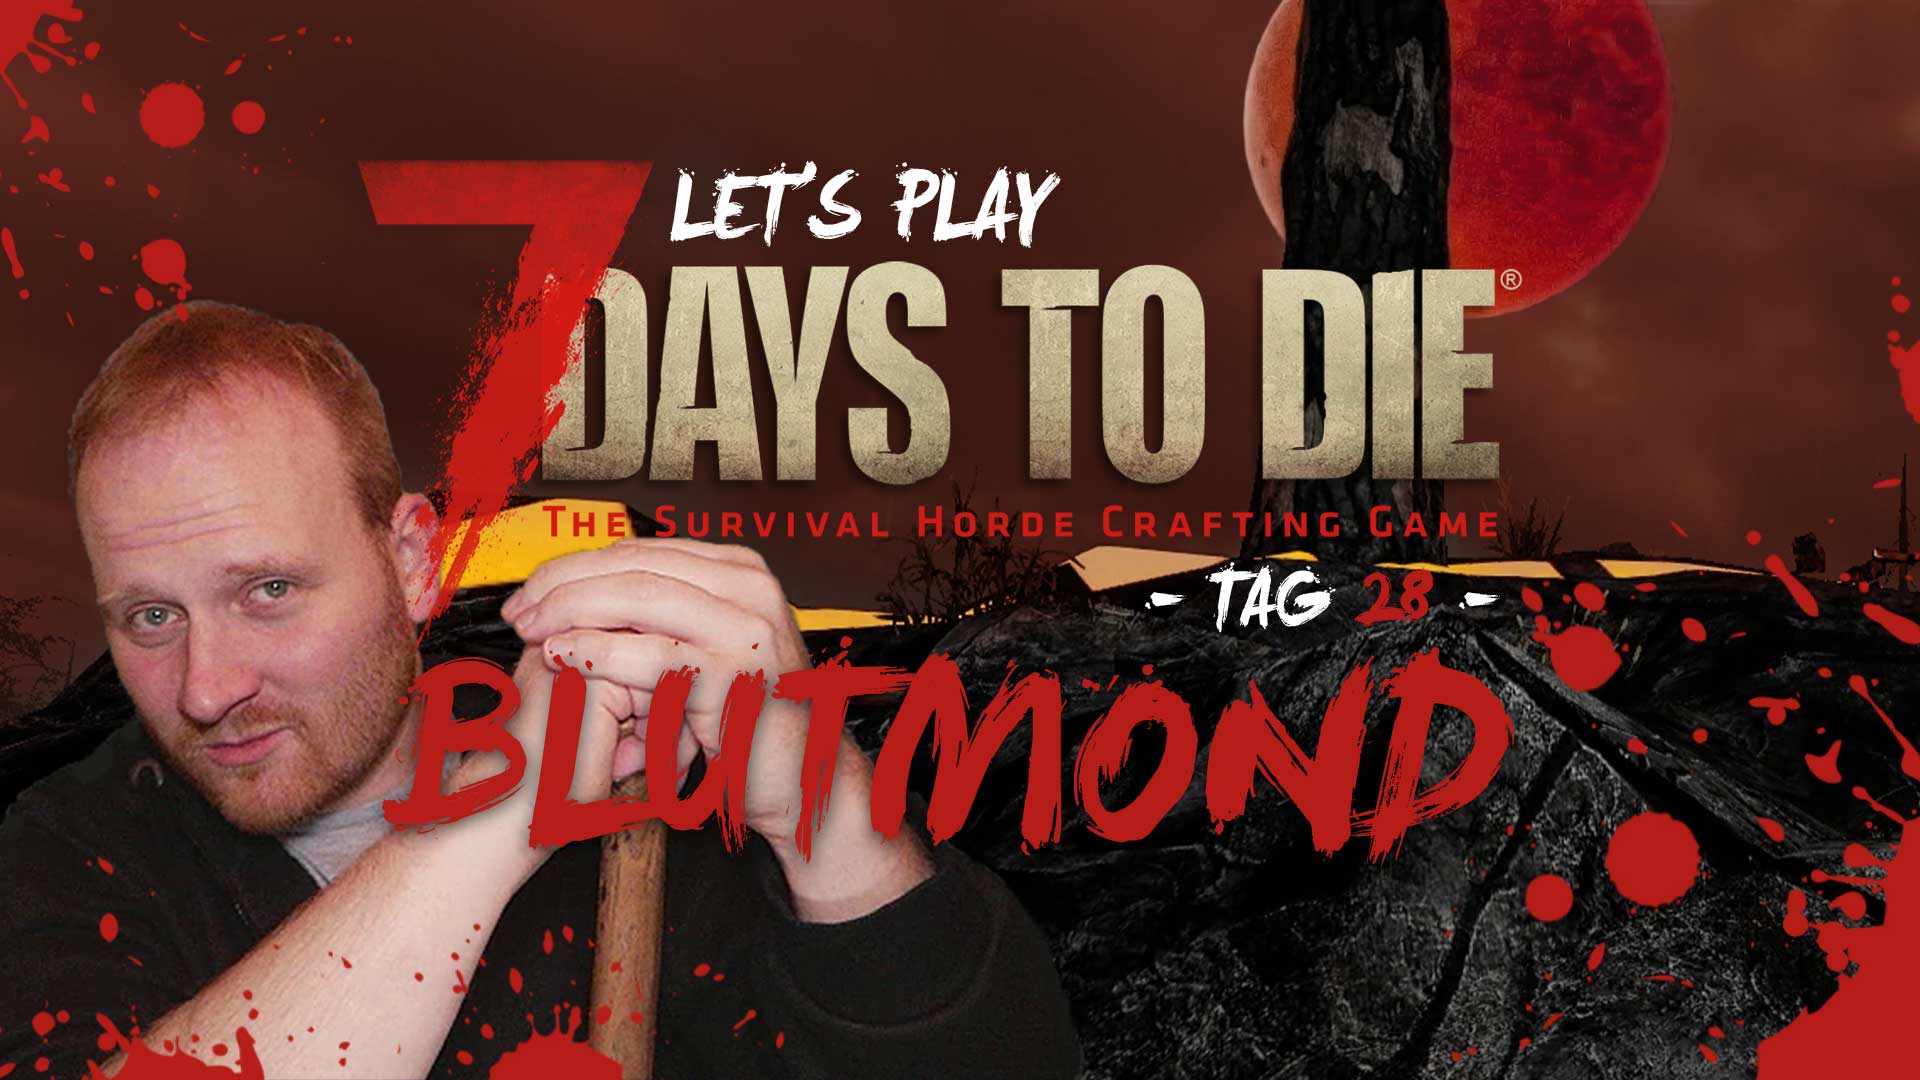 lets play 7 days to die tag 28 GG